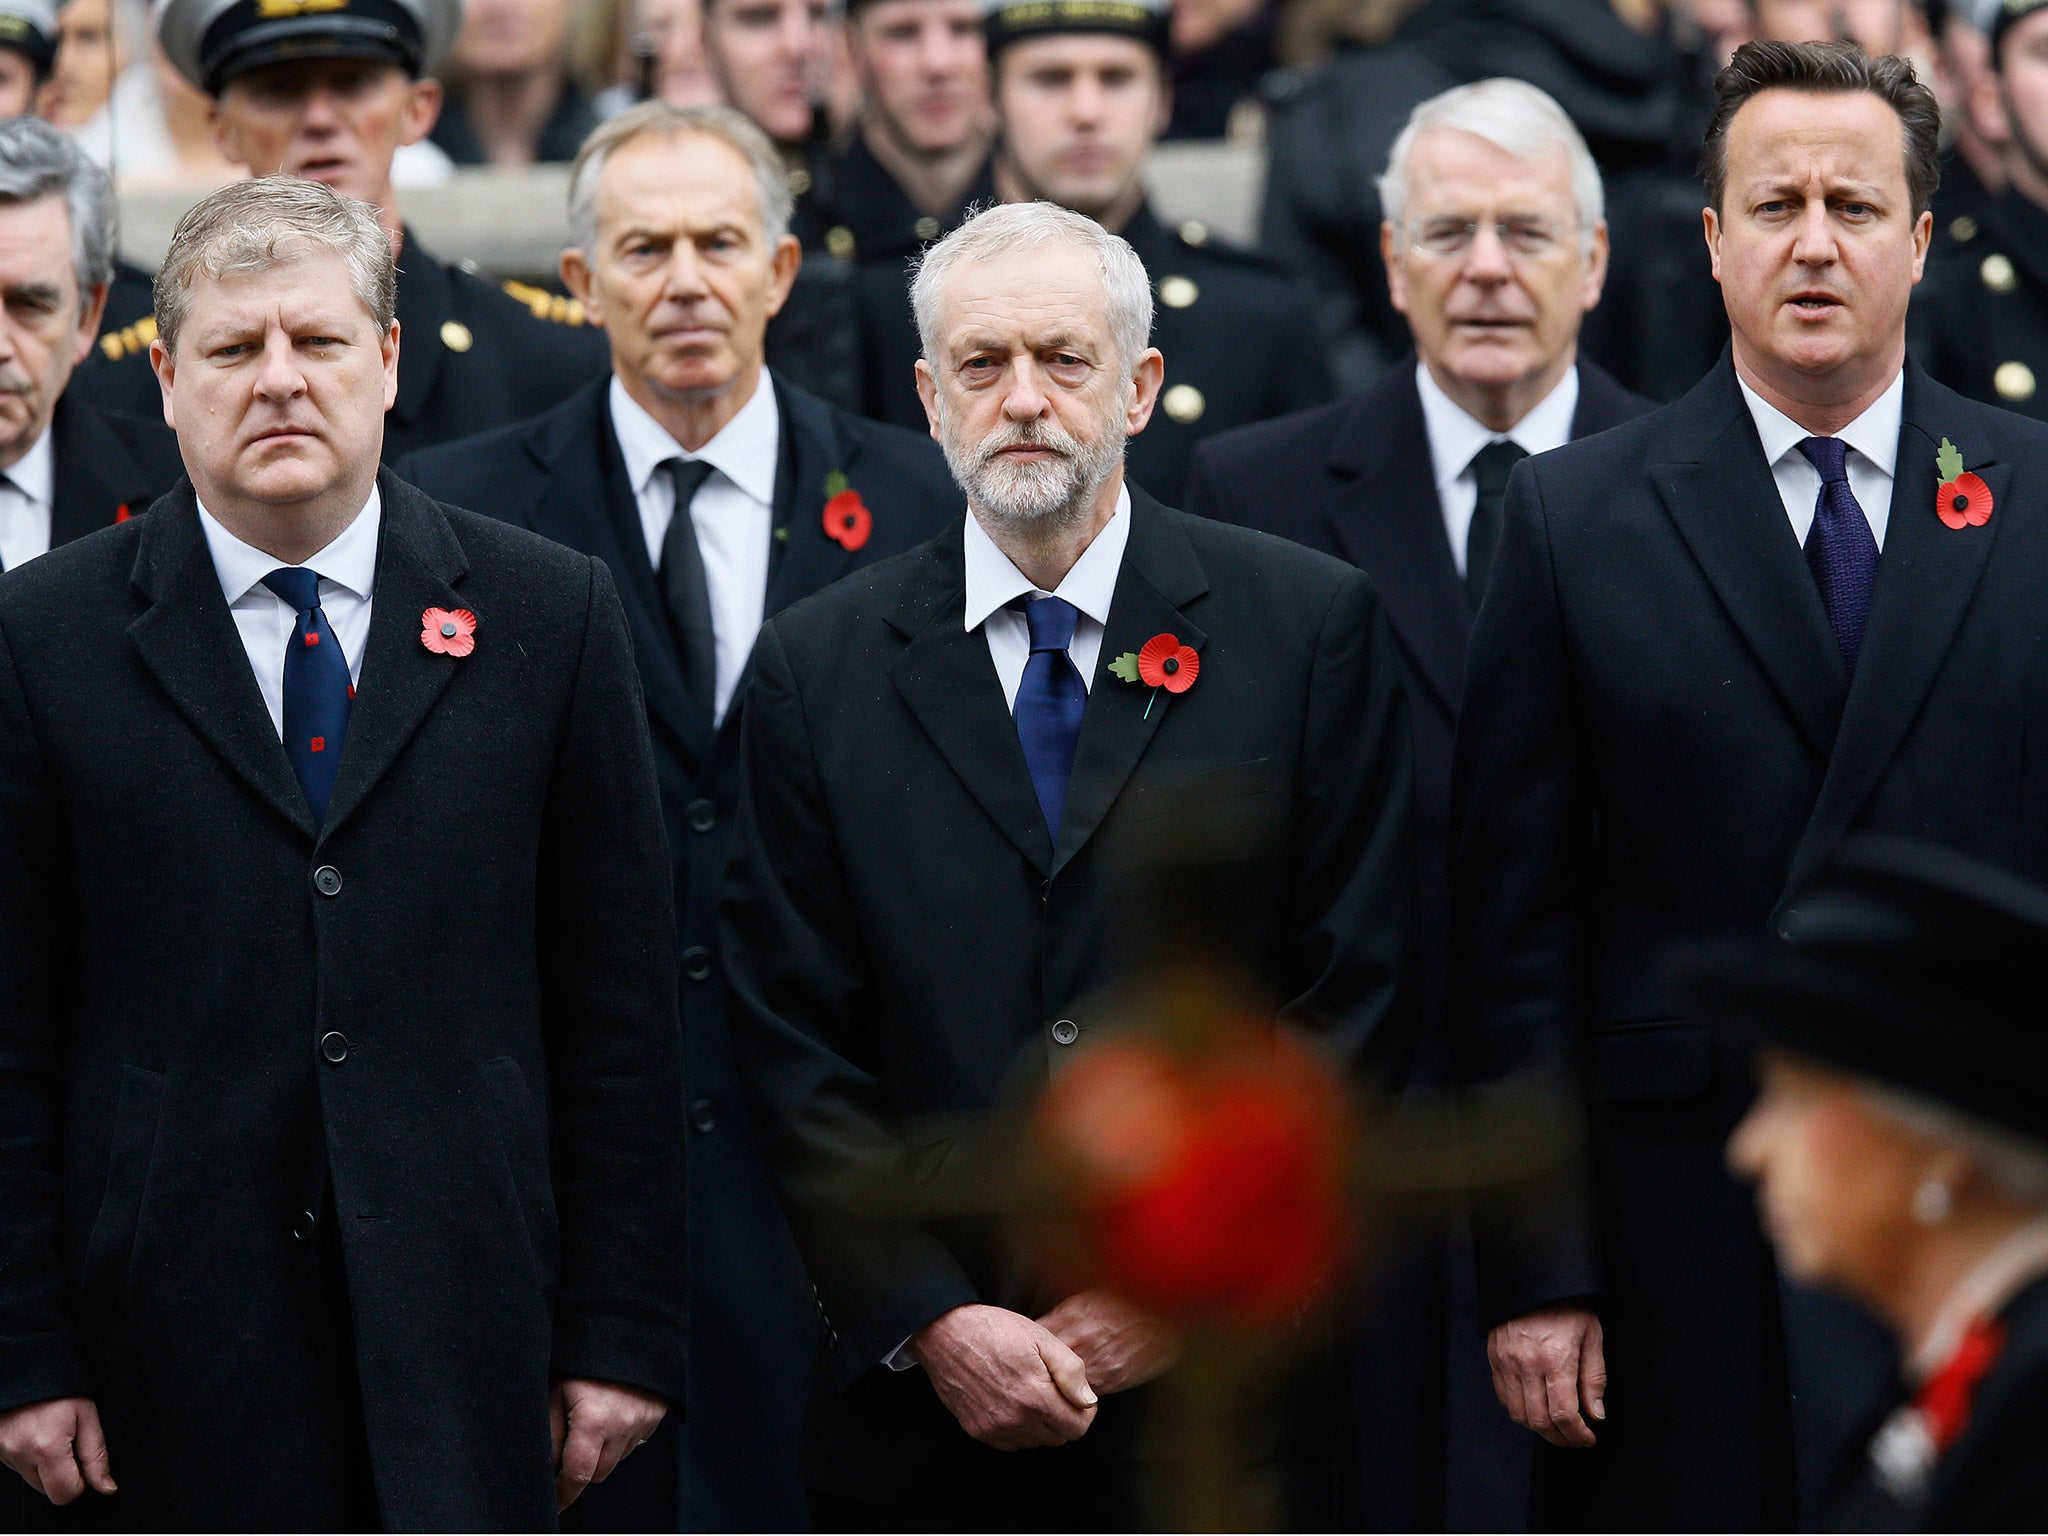 Party leaders gathered to pay their respects